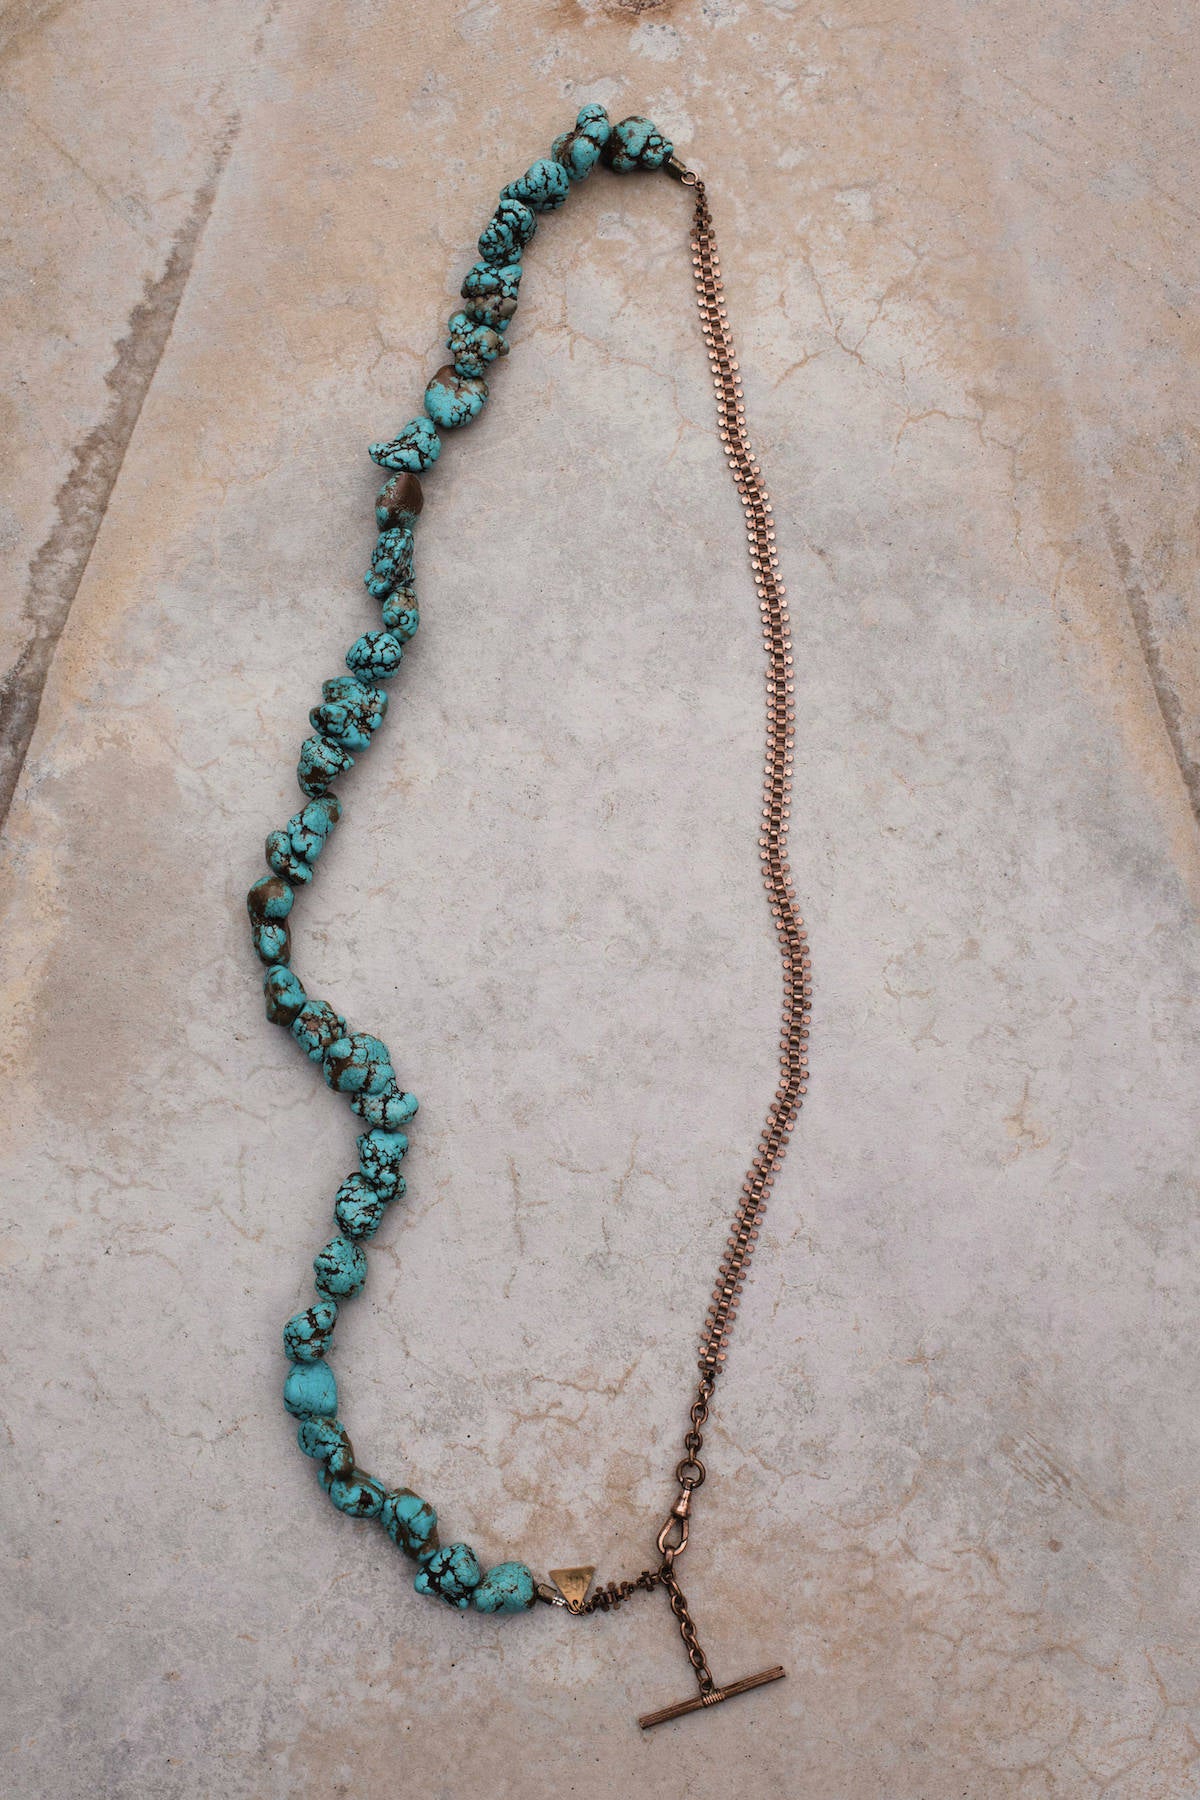 Turquoise Antique Copper Pocket Watch Chain Necklace